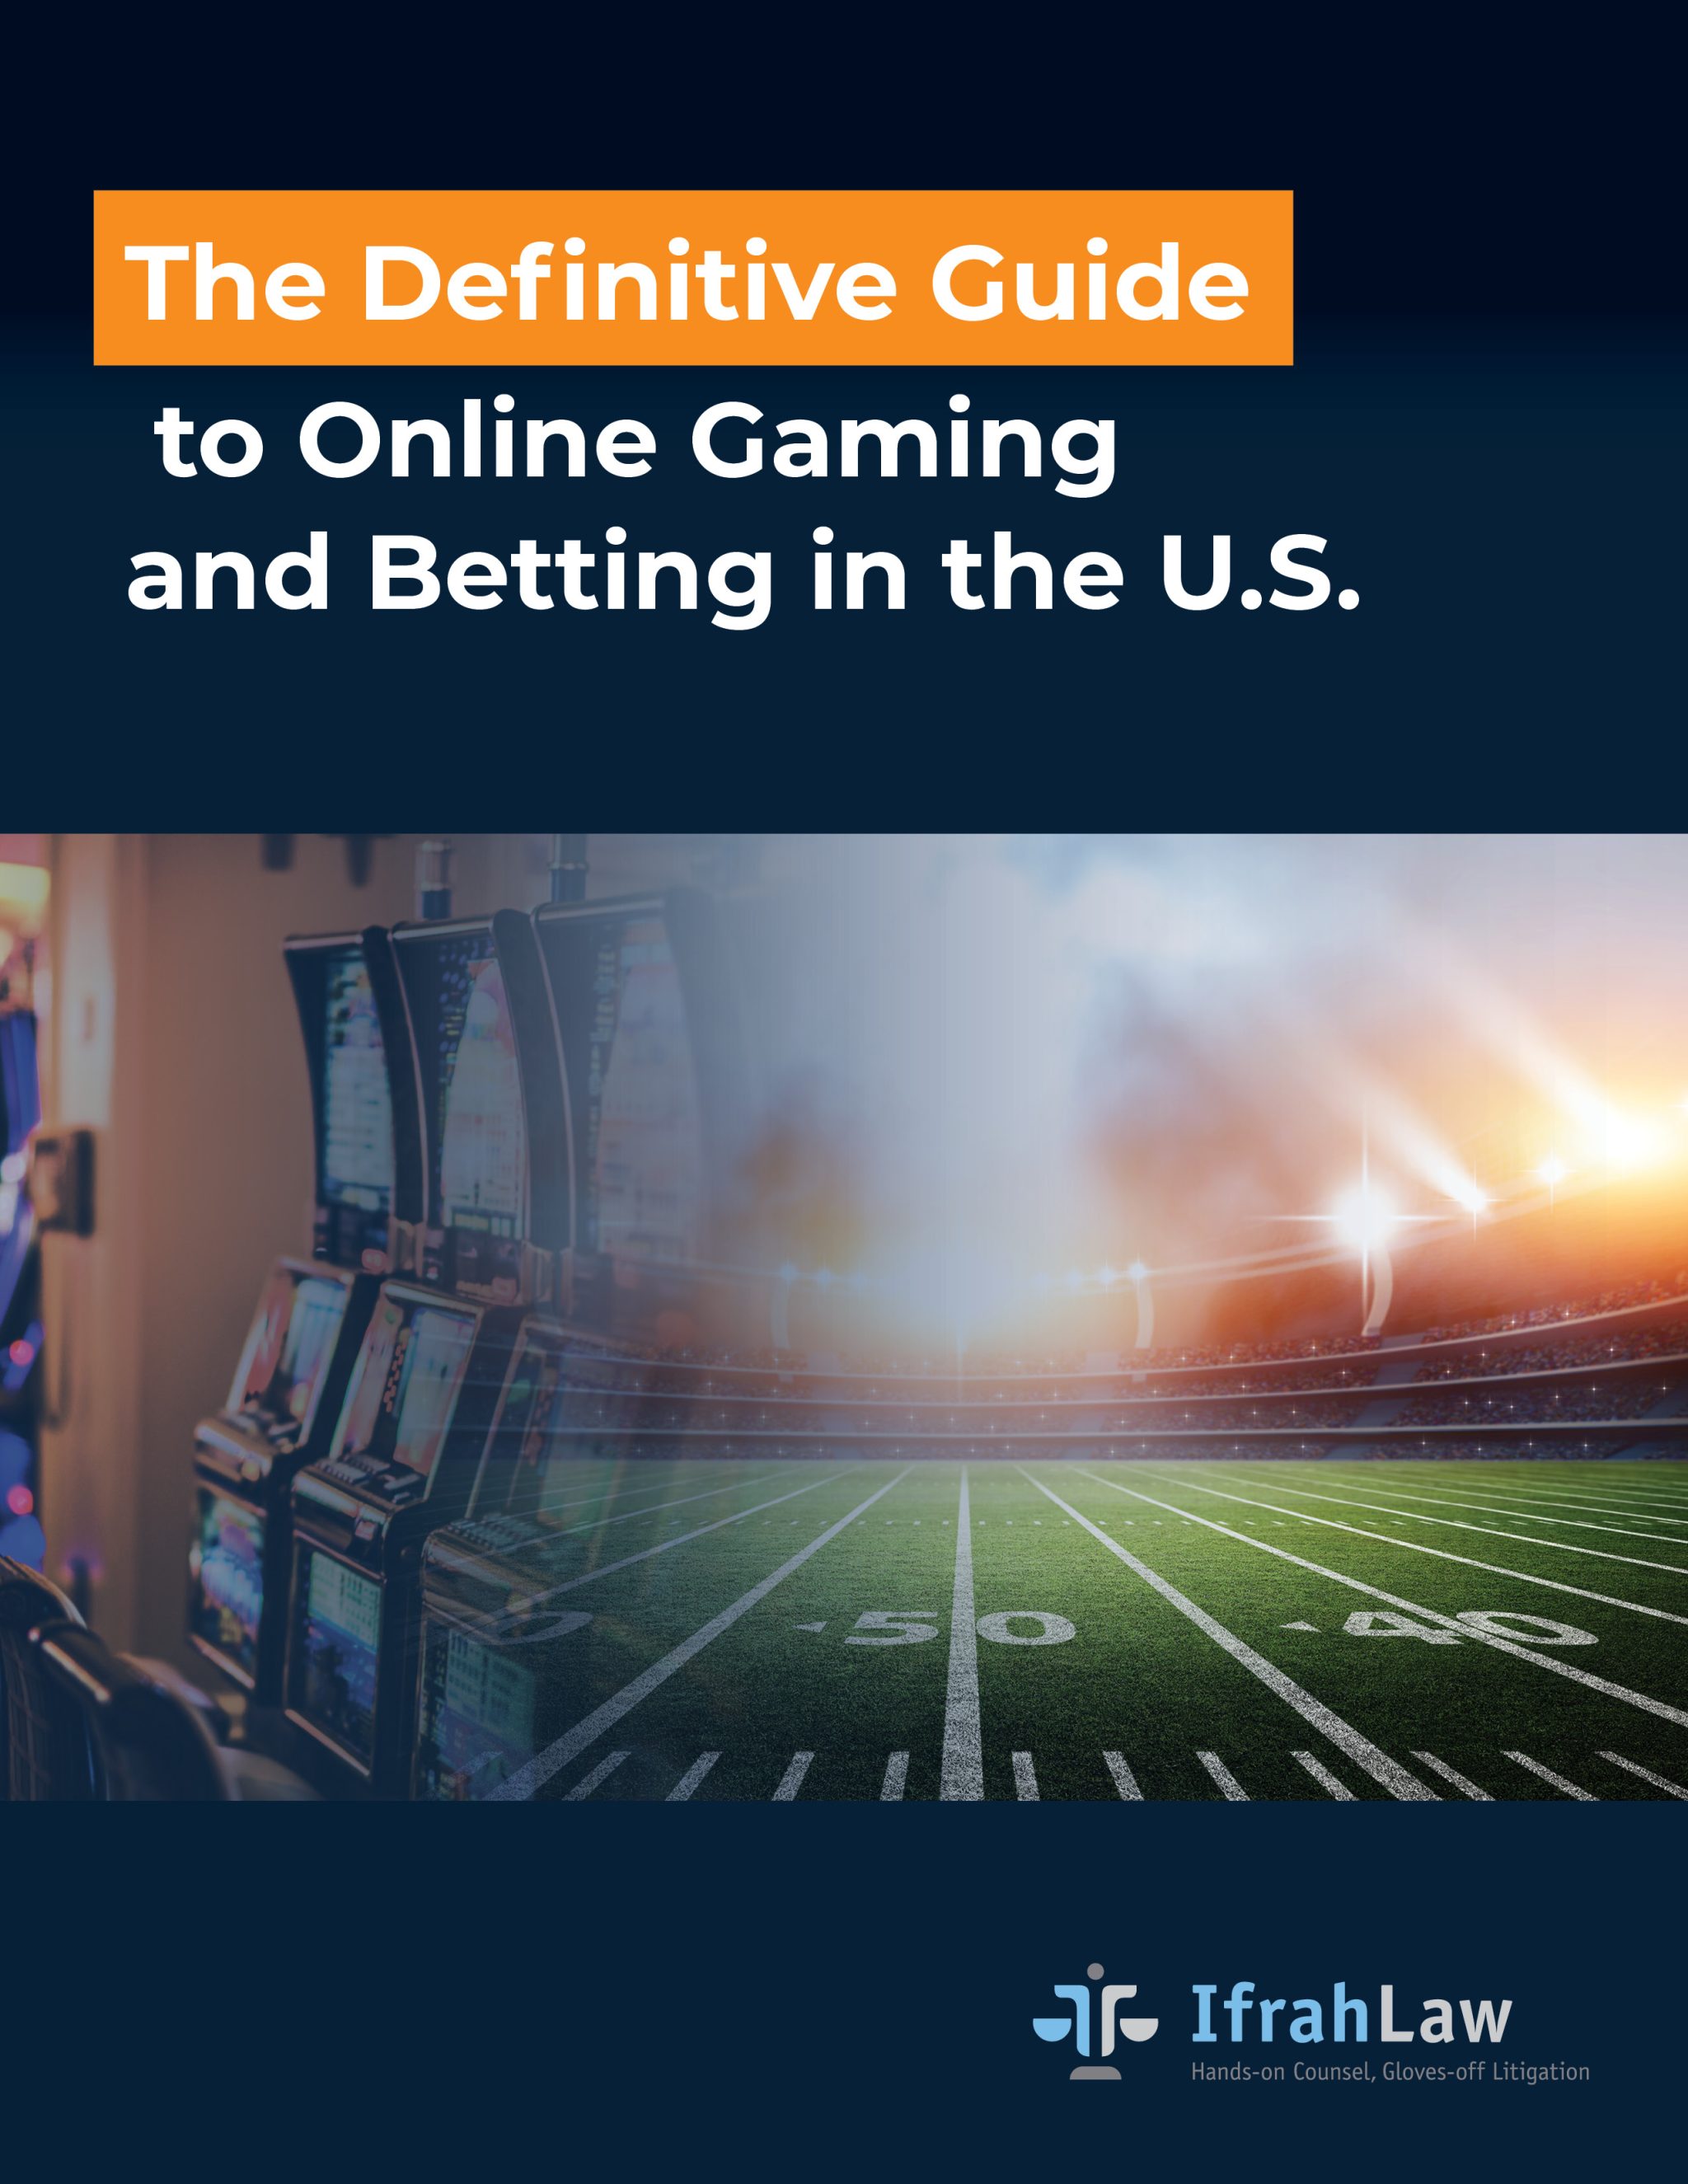 Ifrah Law’s “The Definitive Guide to Online Gaming and Betting in the U.S.” is Available for Download